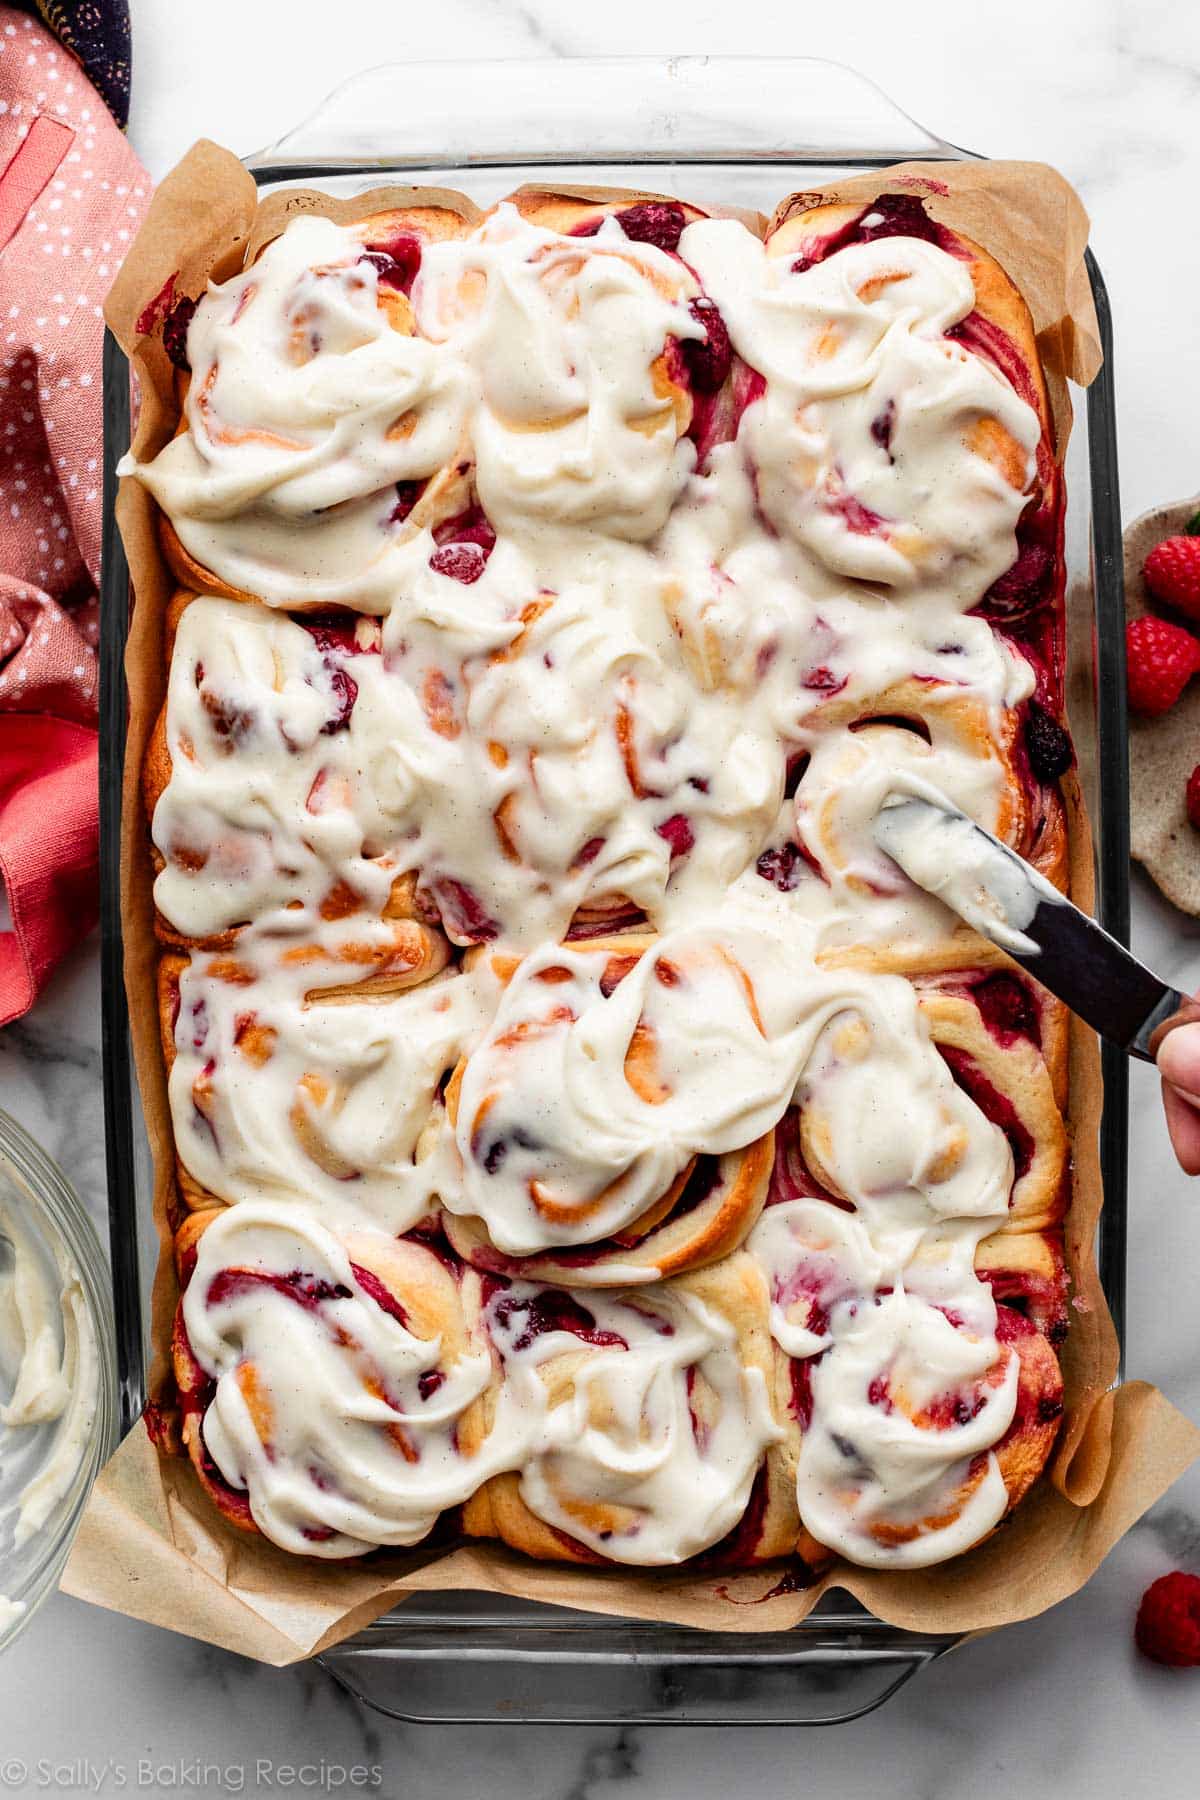 glass pan of raspberry sweet rolls with cream cheese icing.